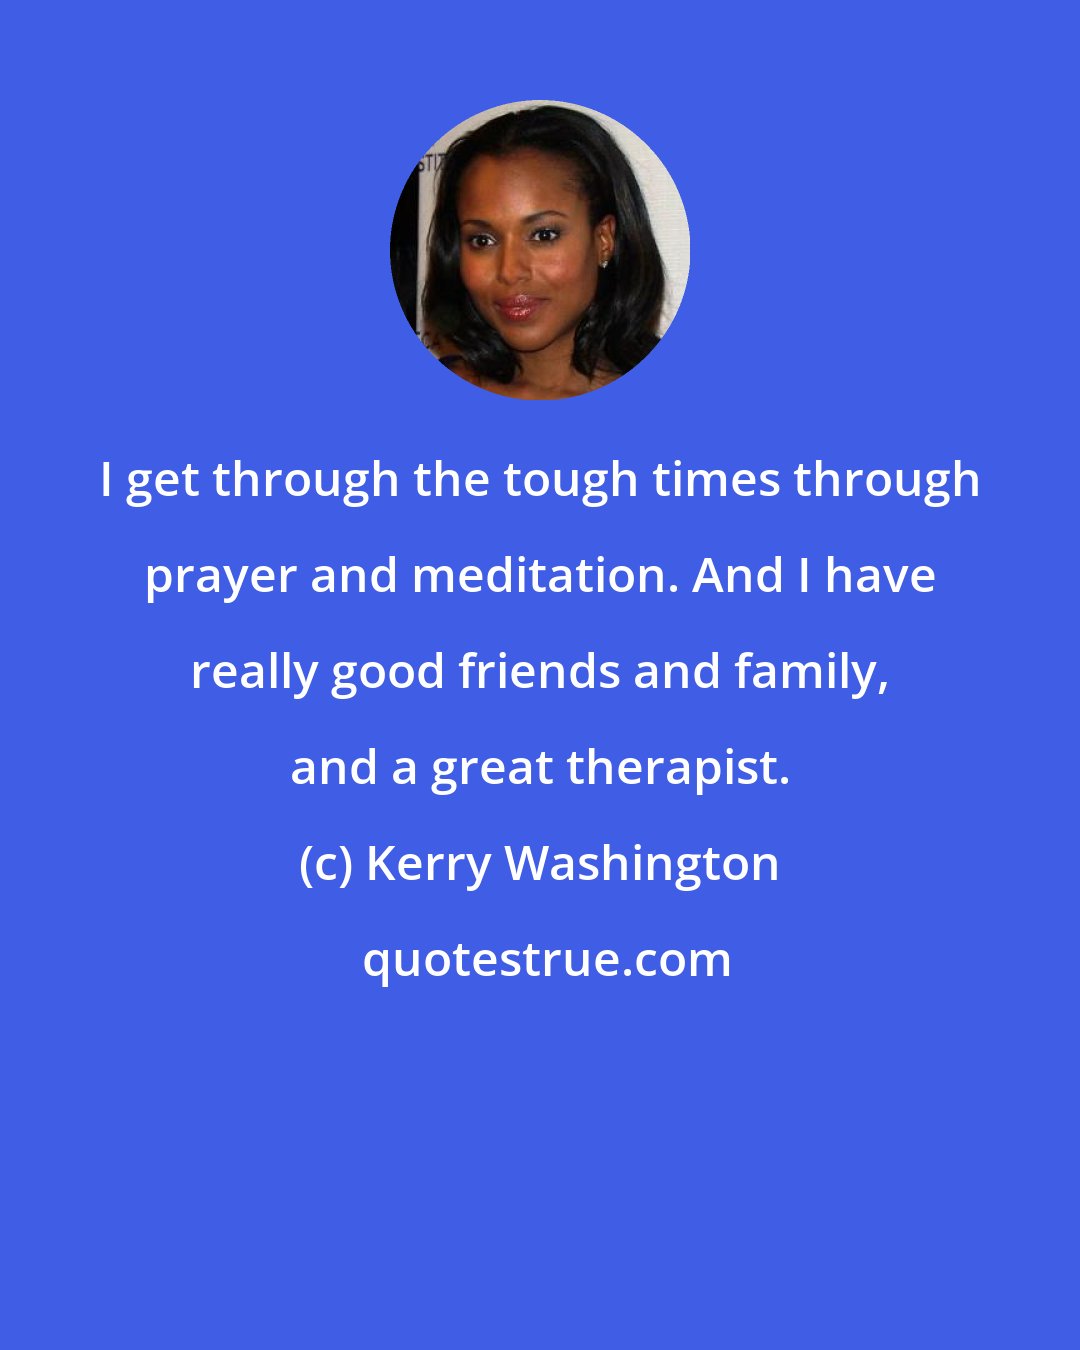 Kerry Washington: I get through the tough times through prayer and meditation. And I have really good friends and family, and a great therapist.